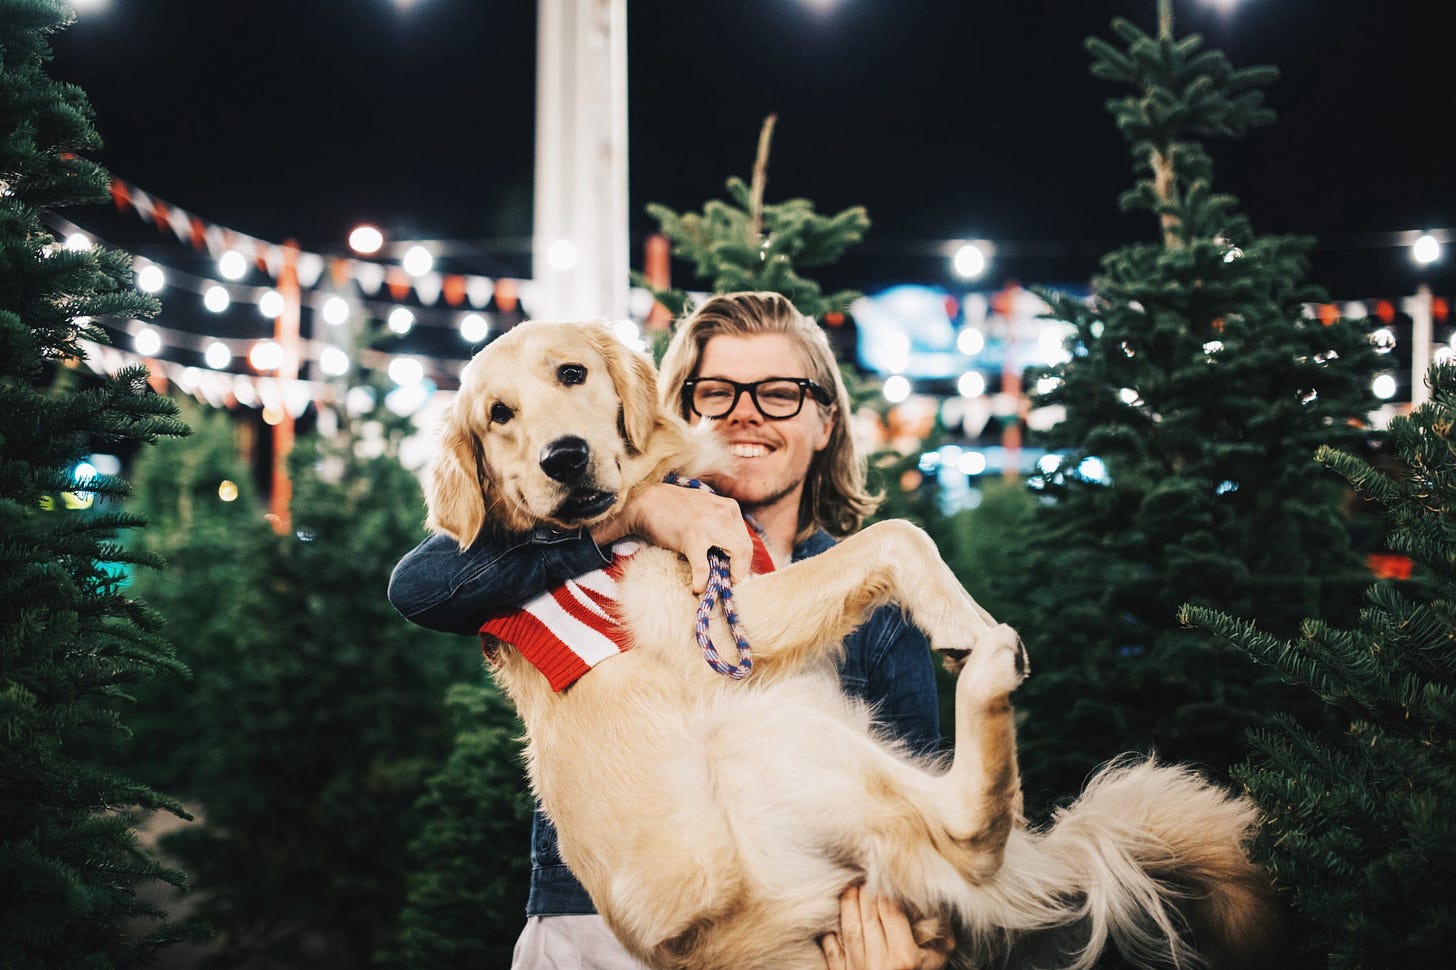 A man holds a golden retriever and smiles in a Christmas tree-filled lot.